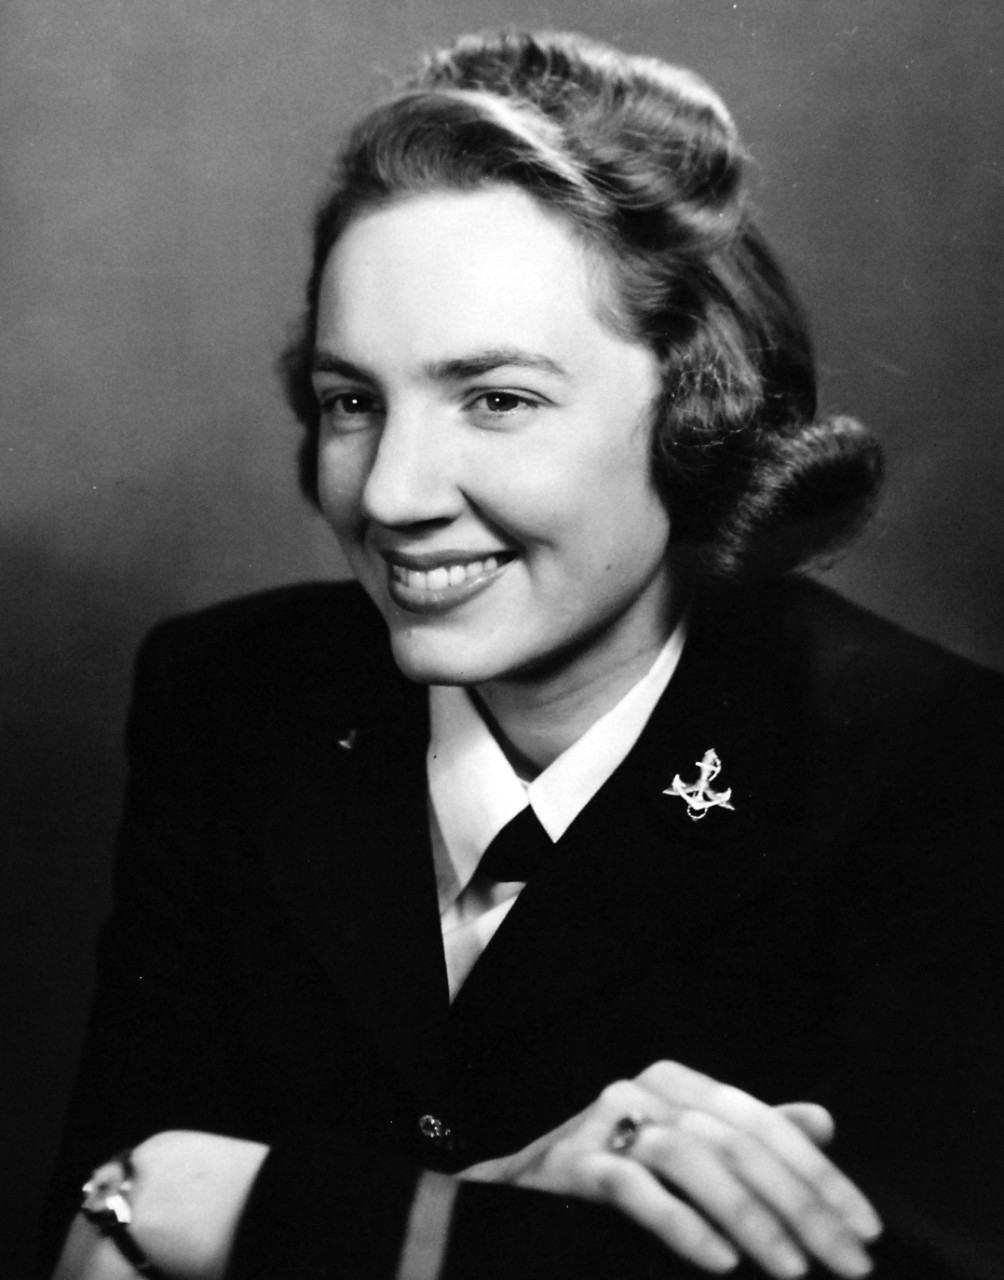 80-G-44328:   Ensign Elizabeth Ender, USNR.  Service Dress Blue.  Photograph released March 1944.  Official U.S. Navy photograph, now in the collections of the National Archives.  